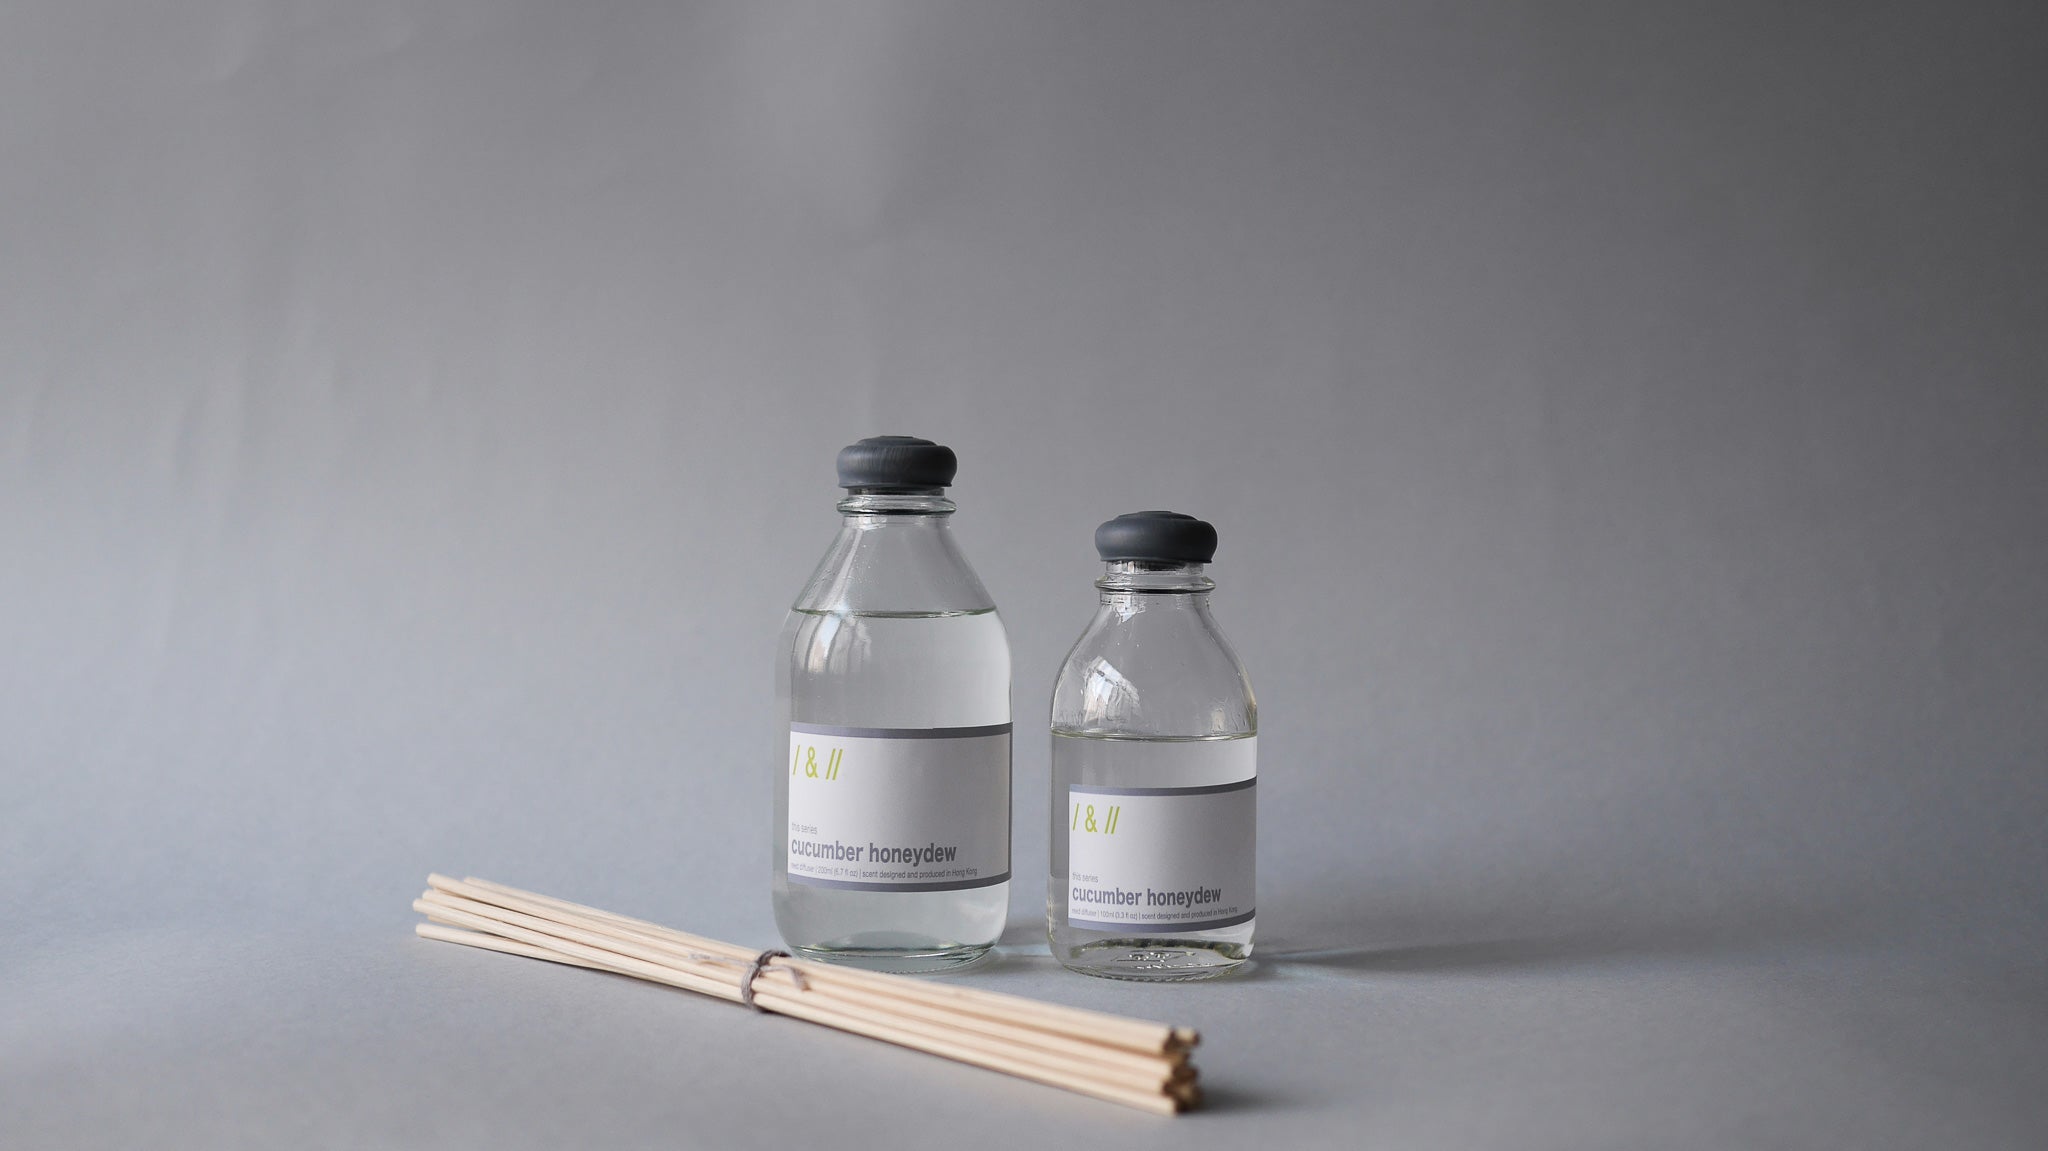 cucumber honeydew / reed diffuser 100ml & 200ml // this series